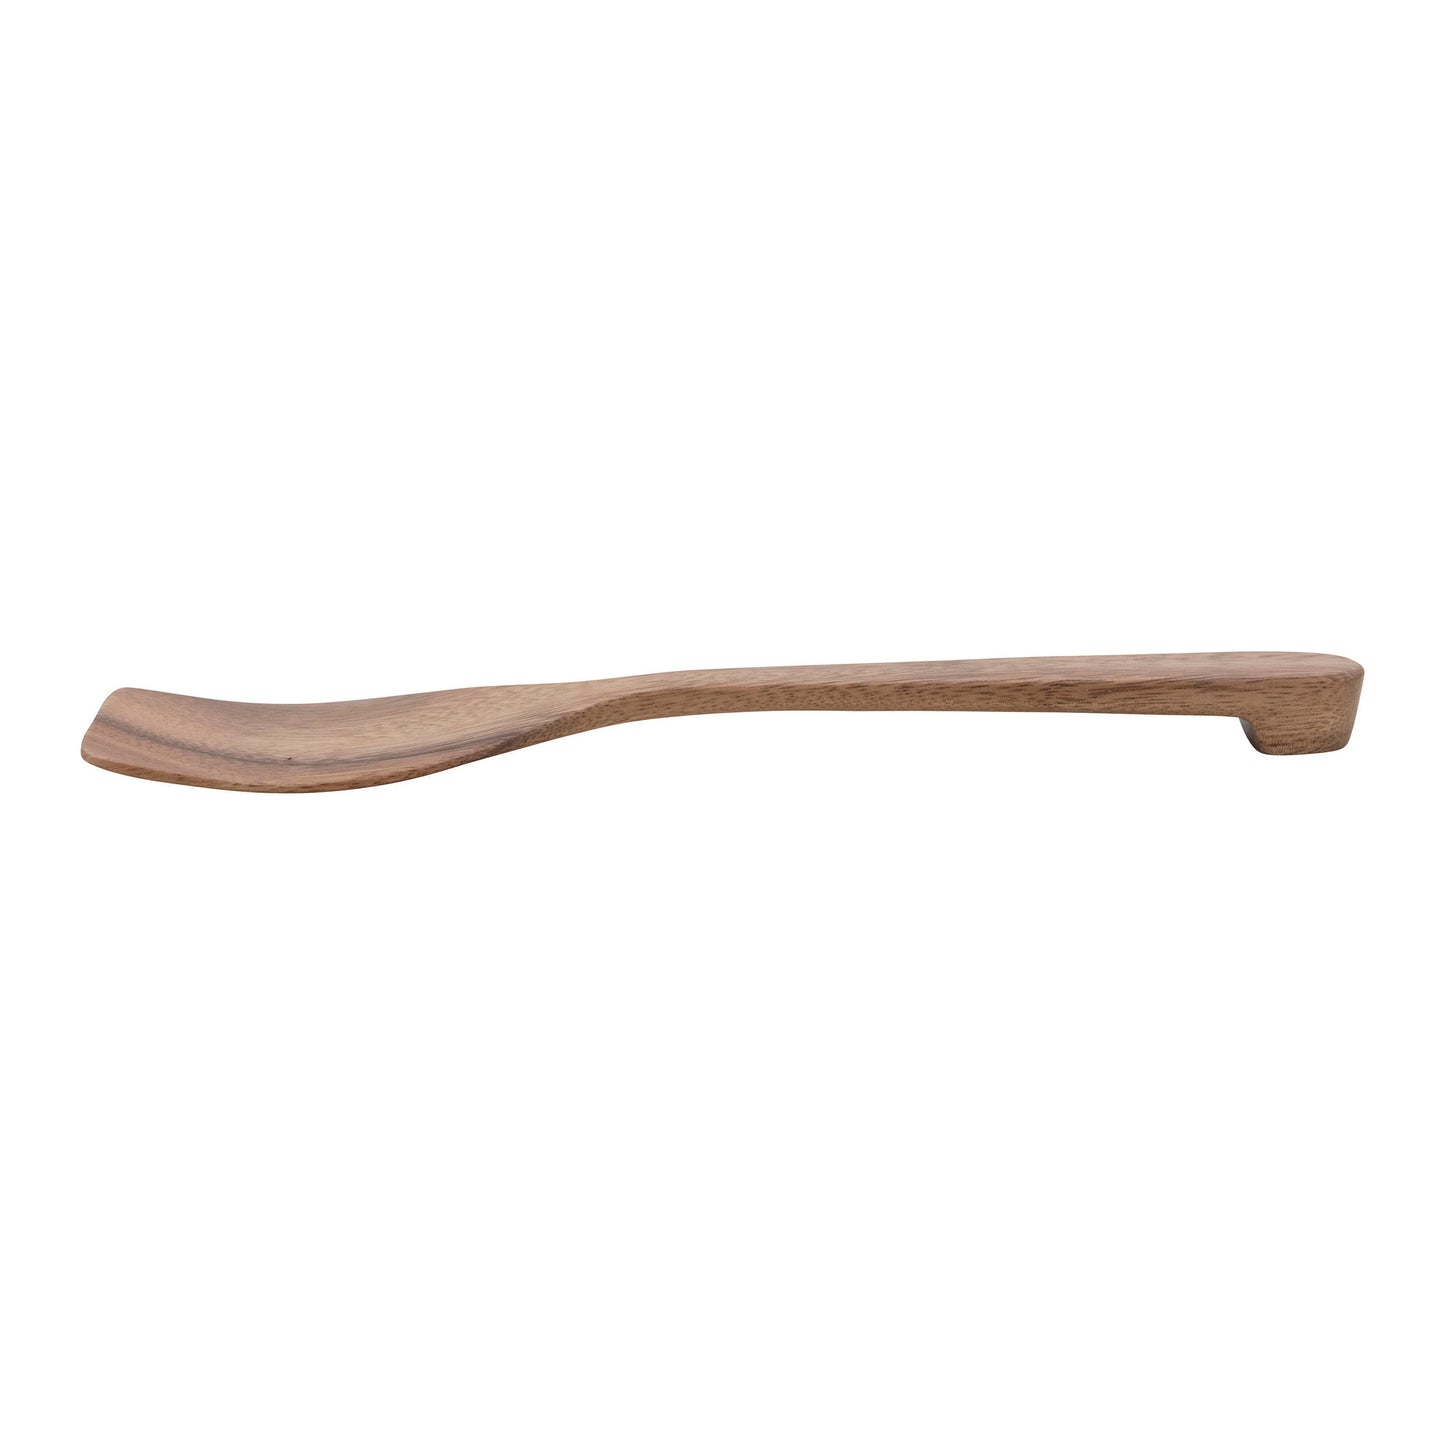 side view of the carved acacia wood spatula on a white background